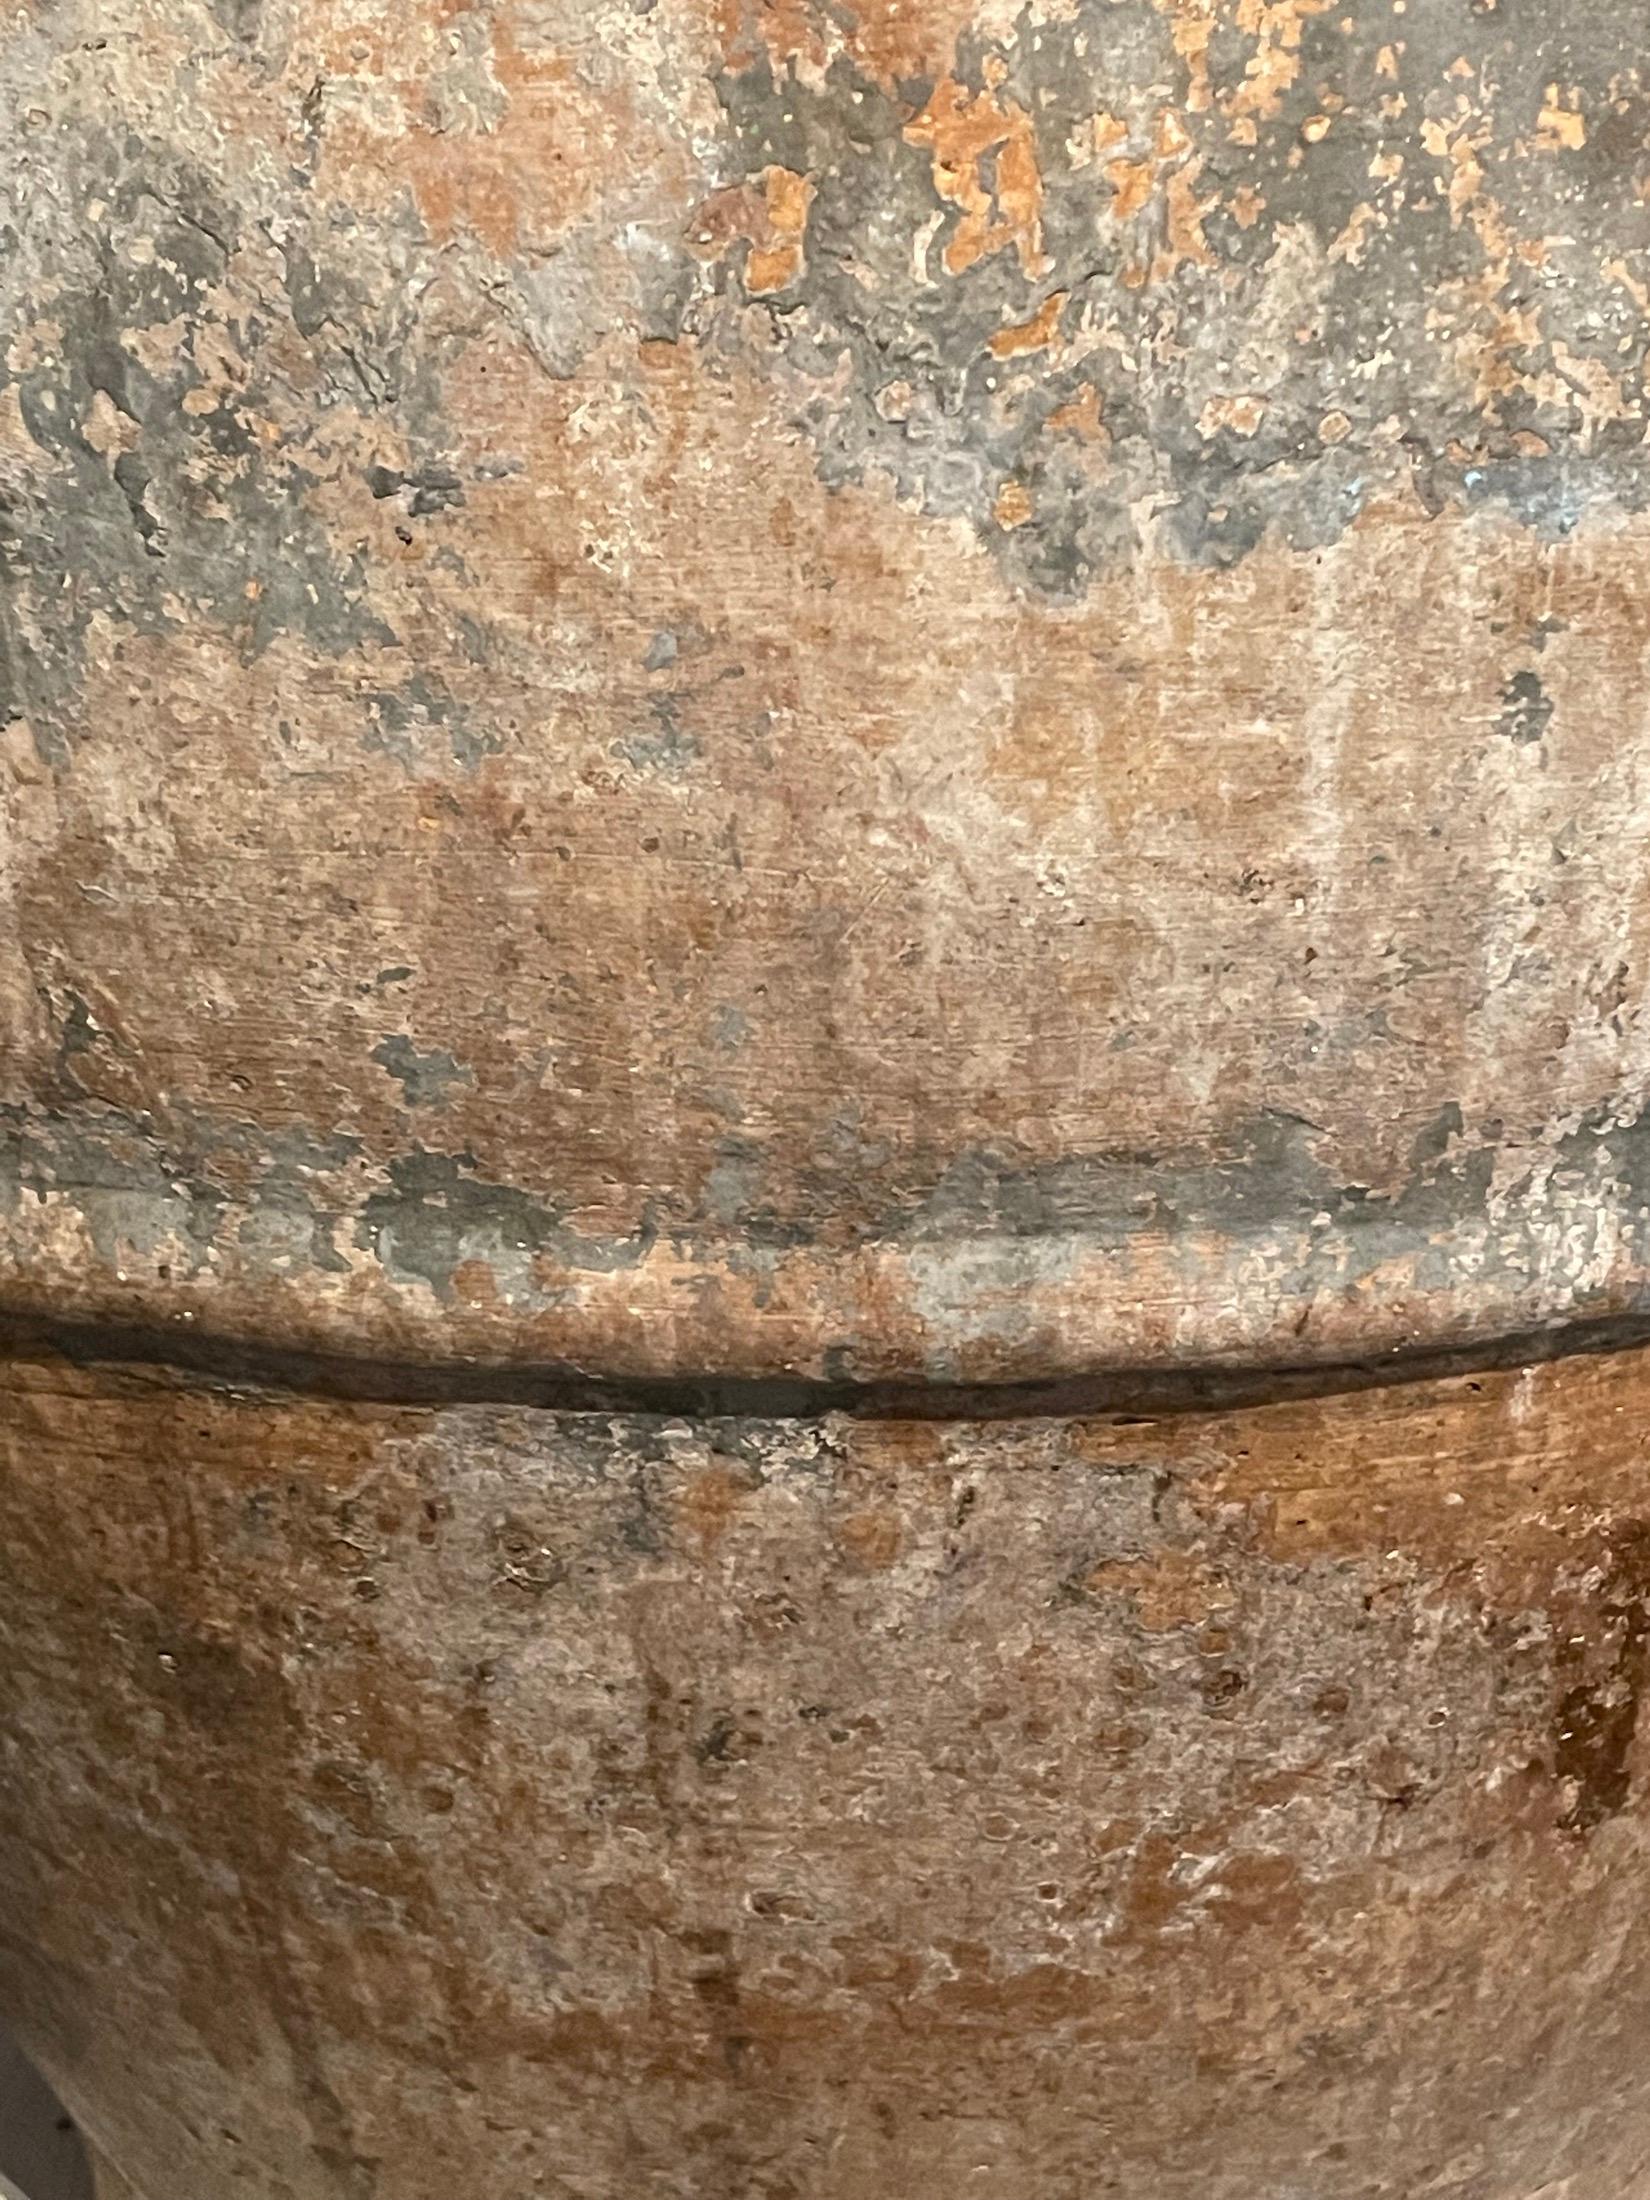 19th century Spanish terracotta olive pot.
Unearthed from a very large family run olive oil producing business in southern Spain.
Beautiful and natural aged patina.
Washed grey and green with single raised texture band.
One of many pieces from a